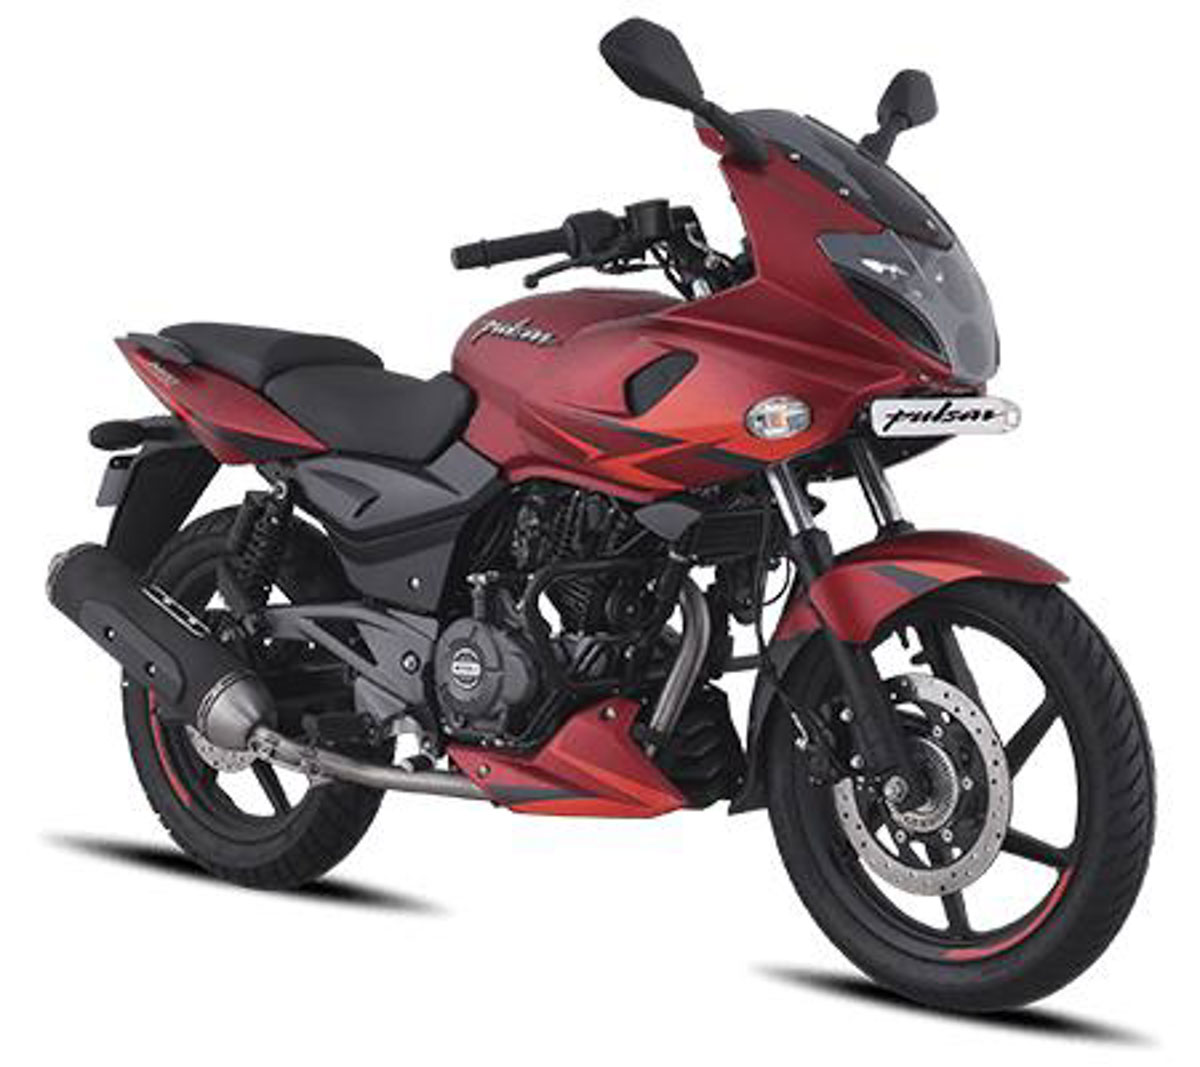 Bajaj Pulsar 220f Launched In New Volcano Red Colour Option